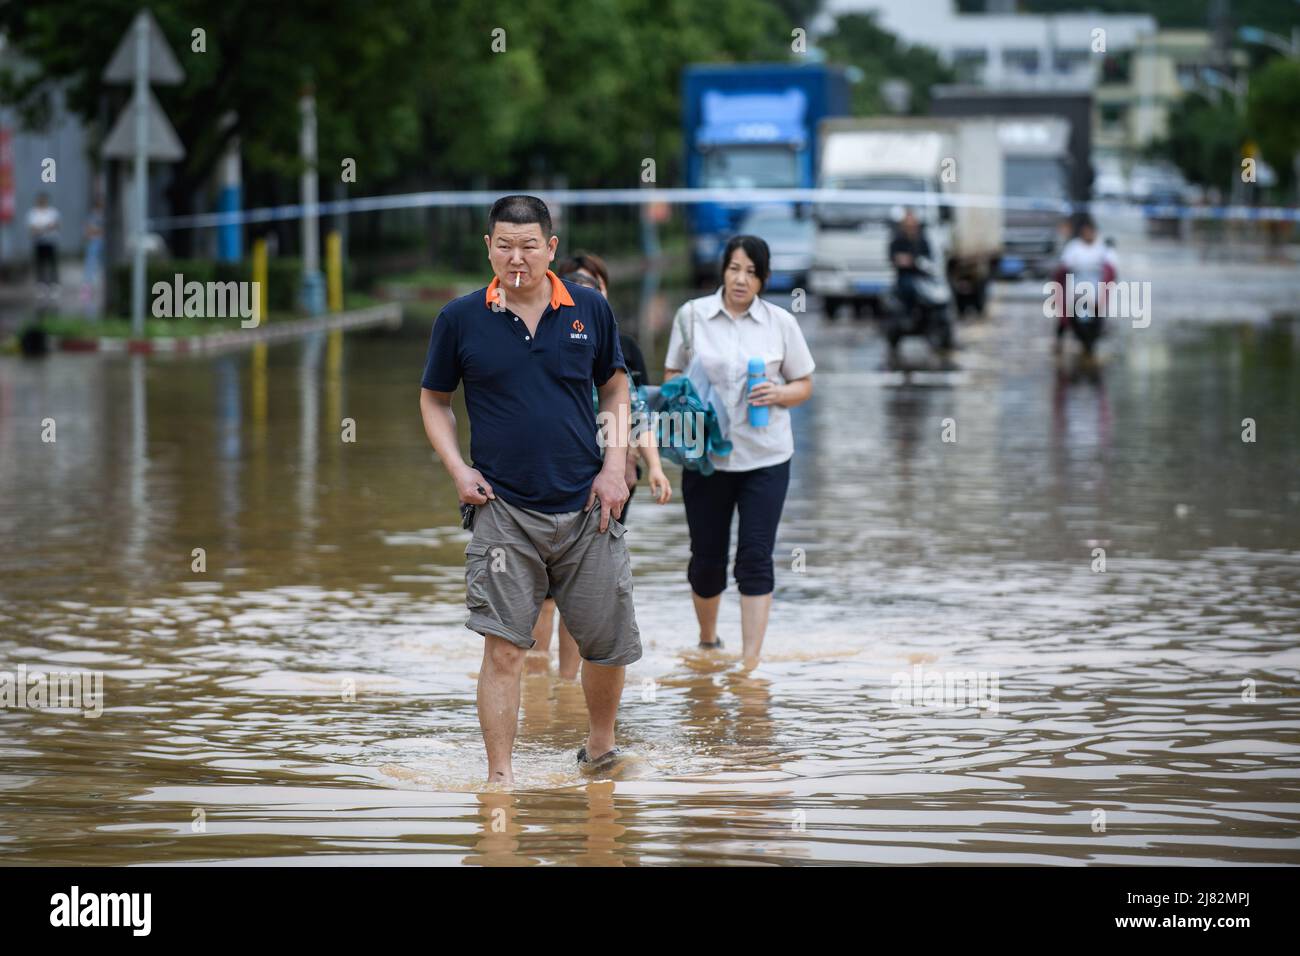 ZHONGSHAN, CHINA - MAY 12, 2022 - Citizens walk in a flooded street after a rainstorm in Zhongshan, Guangdong Province, China, May 12, 2022. Stock Photo